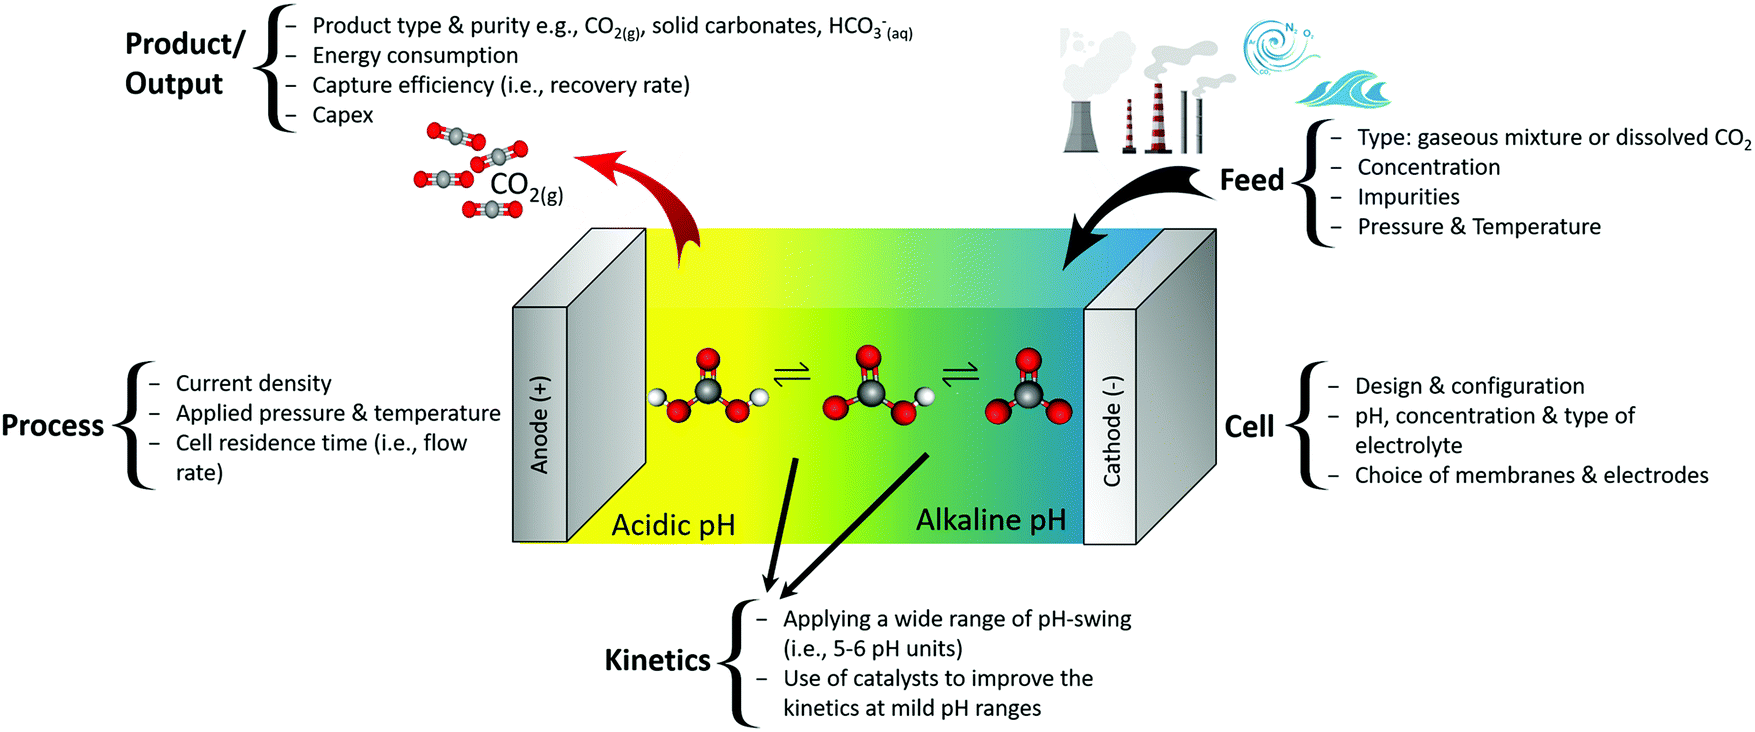 Electrochemical carbon dioxide capture to close the carbon cycle - Energy &amp; Environmental Science (RSC Publishing) DOI:10.1039/D0EE03382K